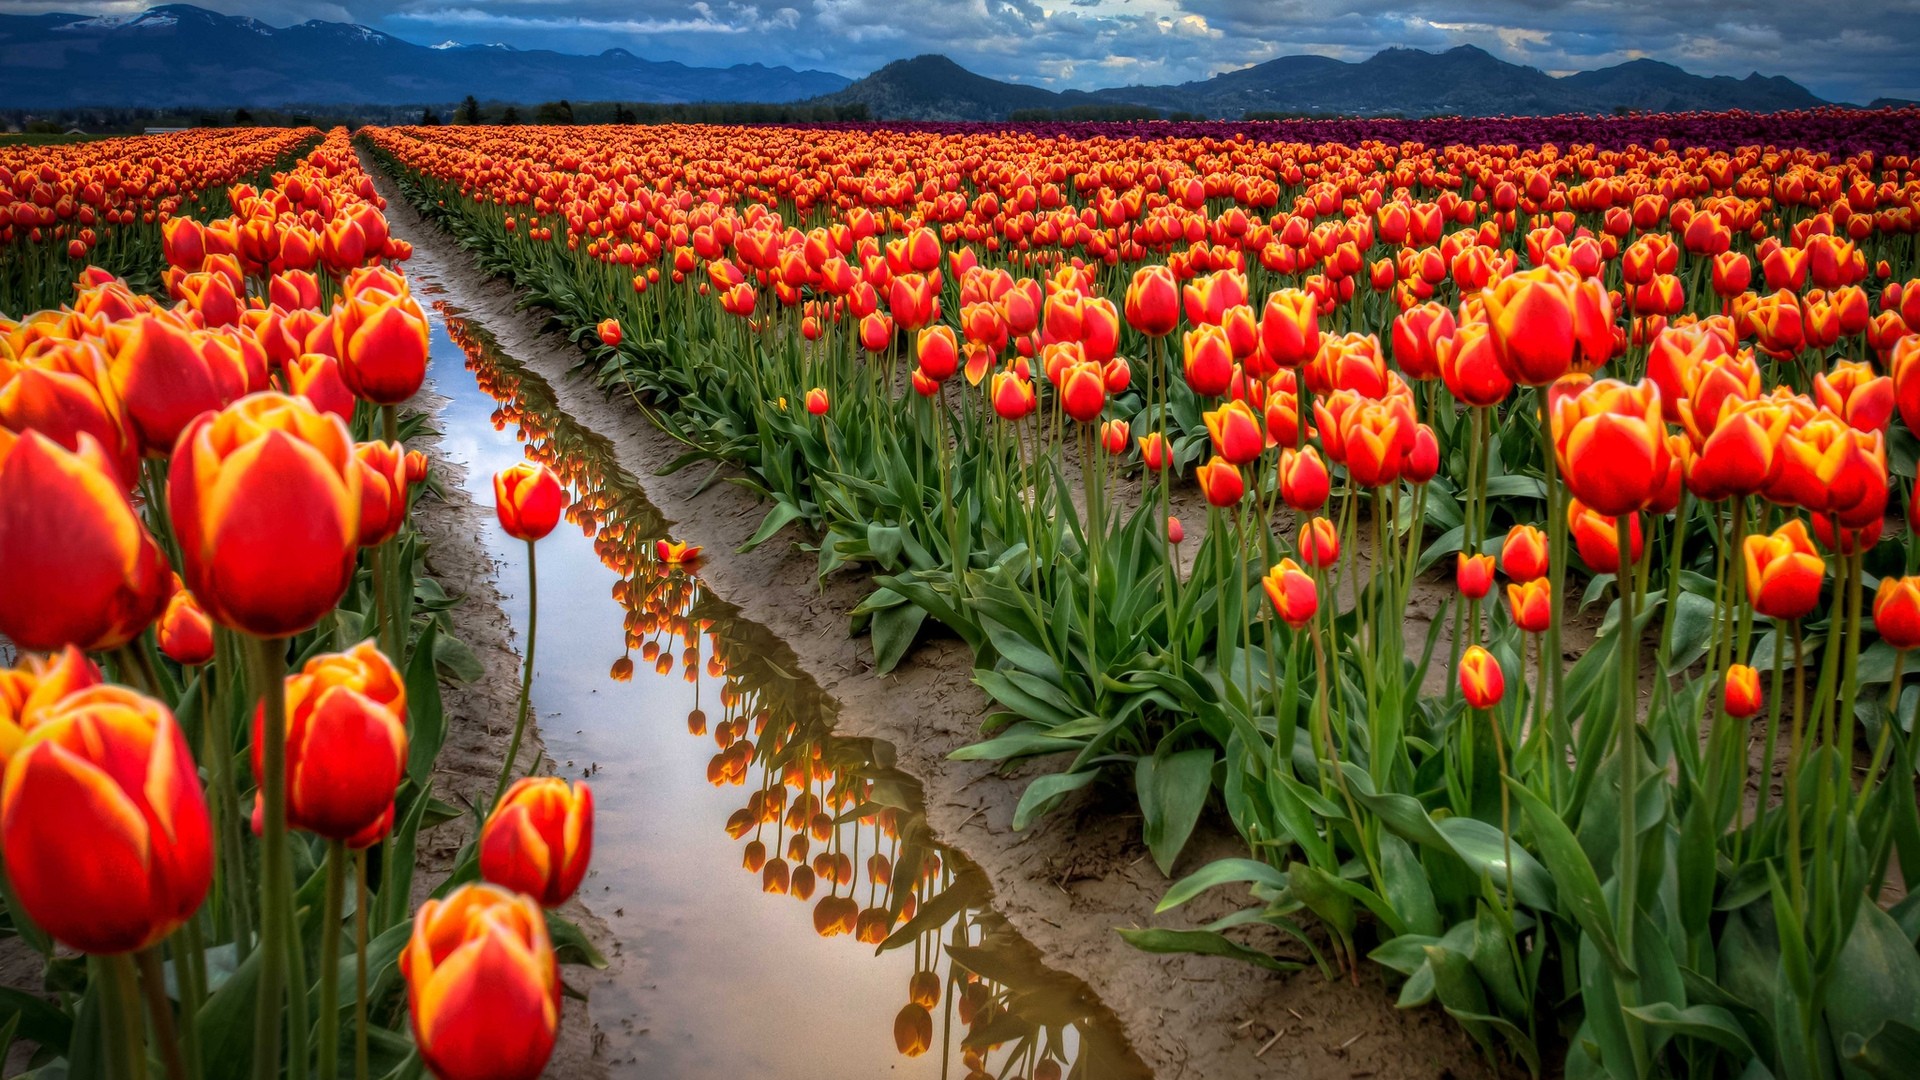 landscapes, Nature, Flowers, Tulips, Hdr, Photography Wallpaper